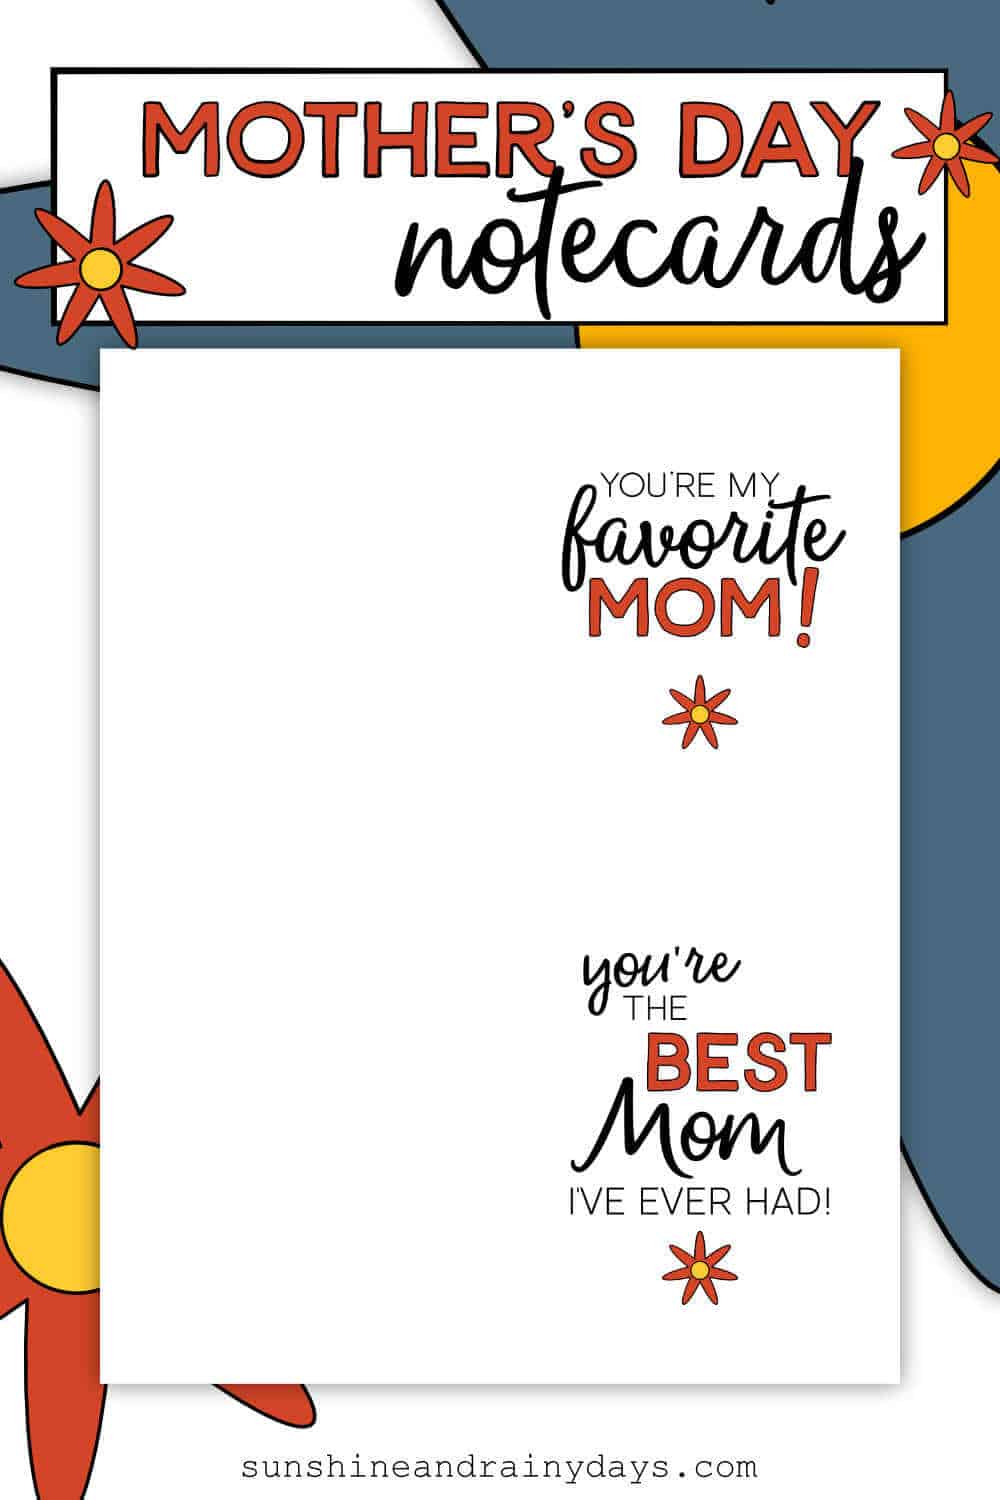 mother-s-day-free-printable-notecard-sunshine-and-rainy-days